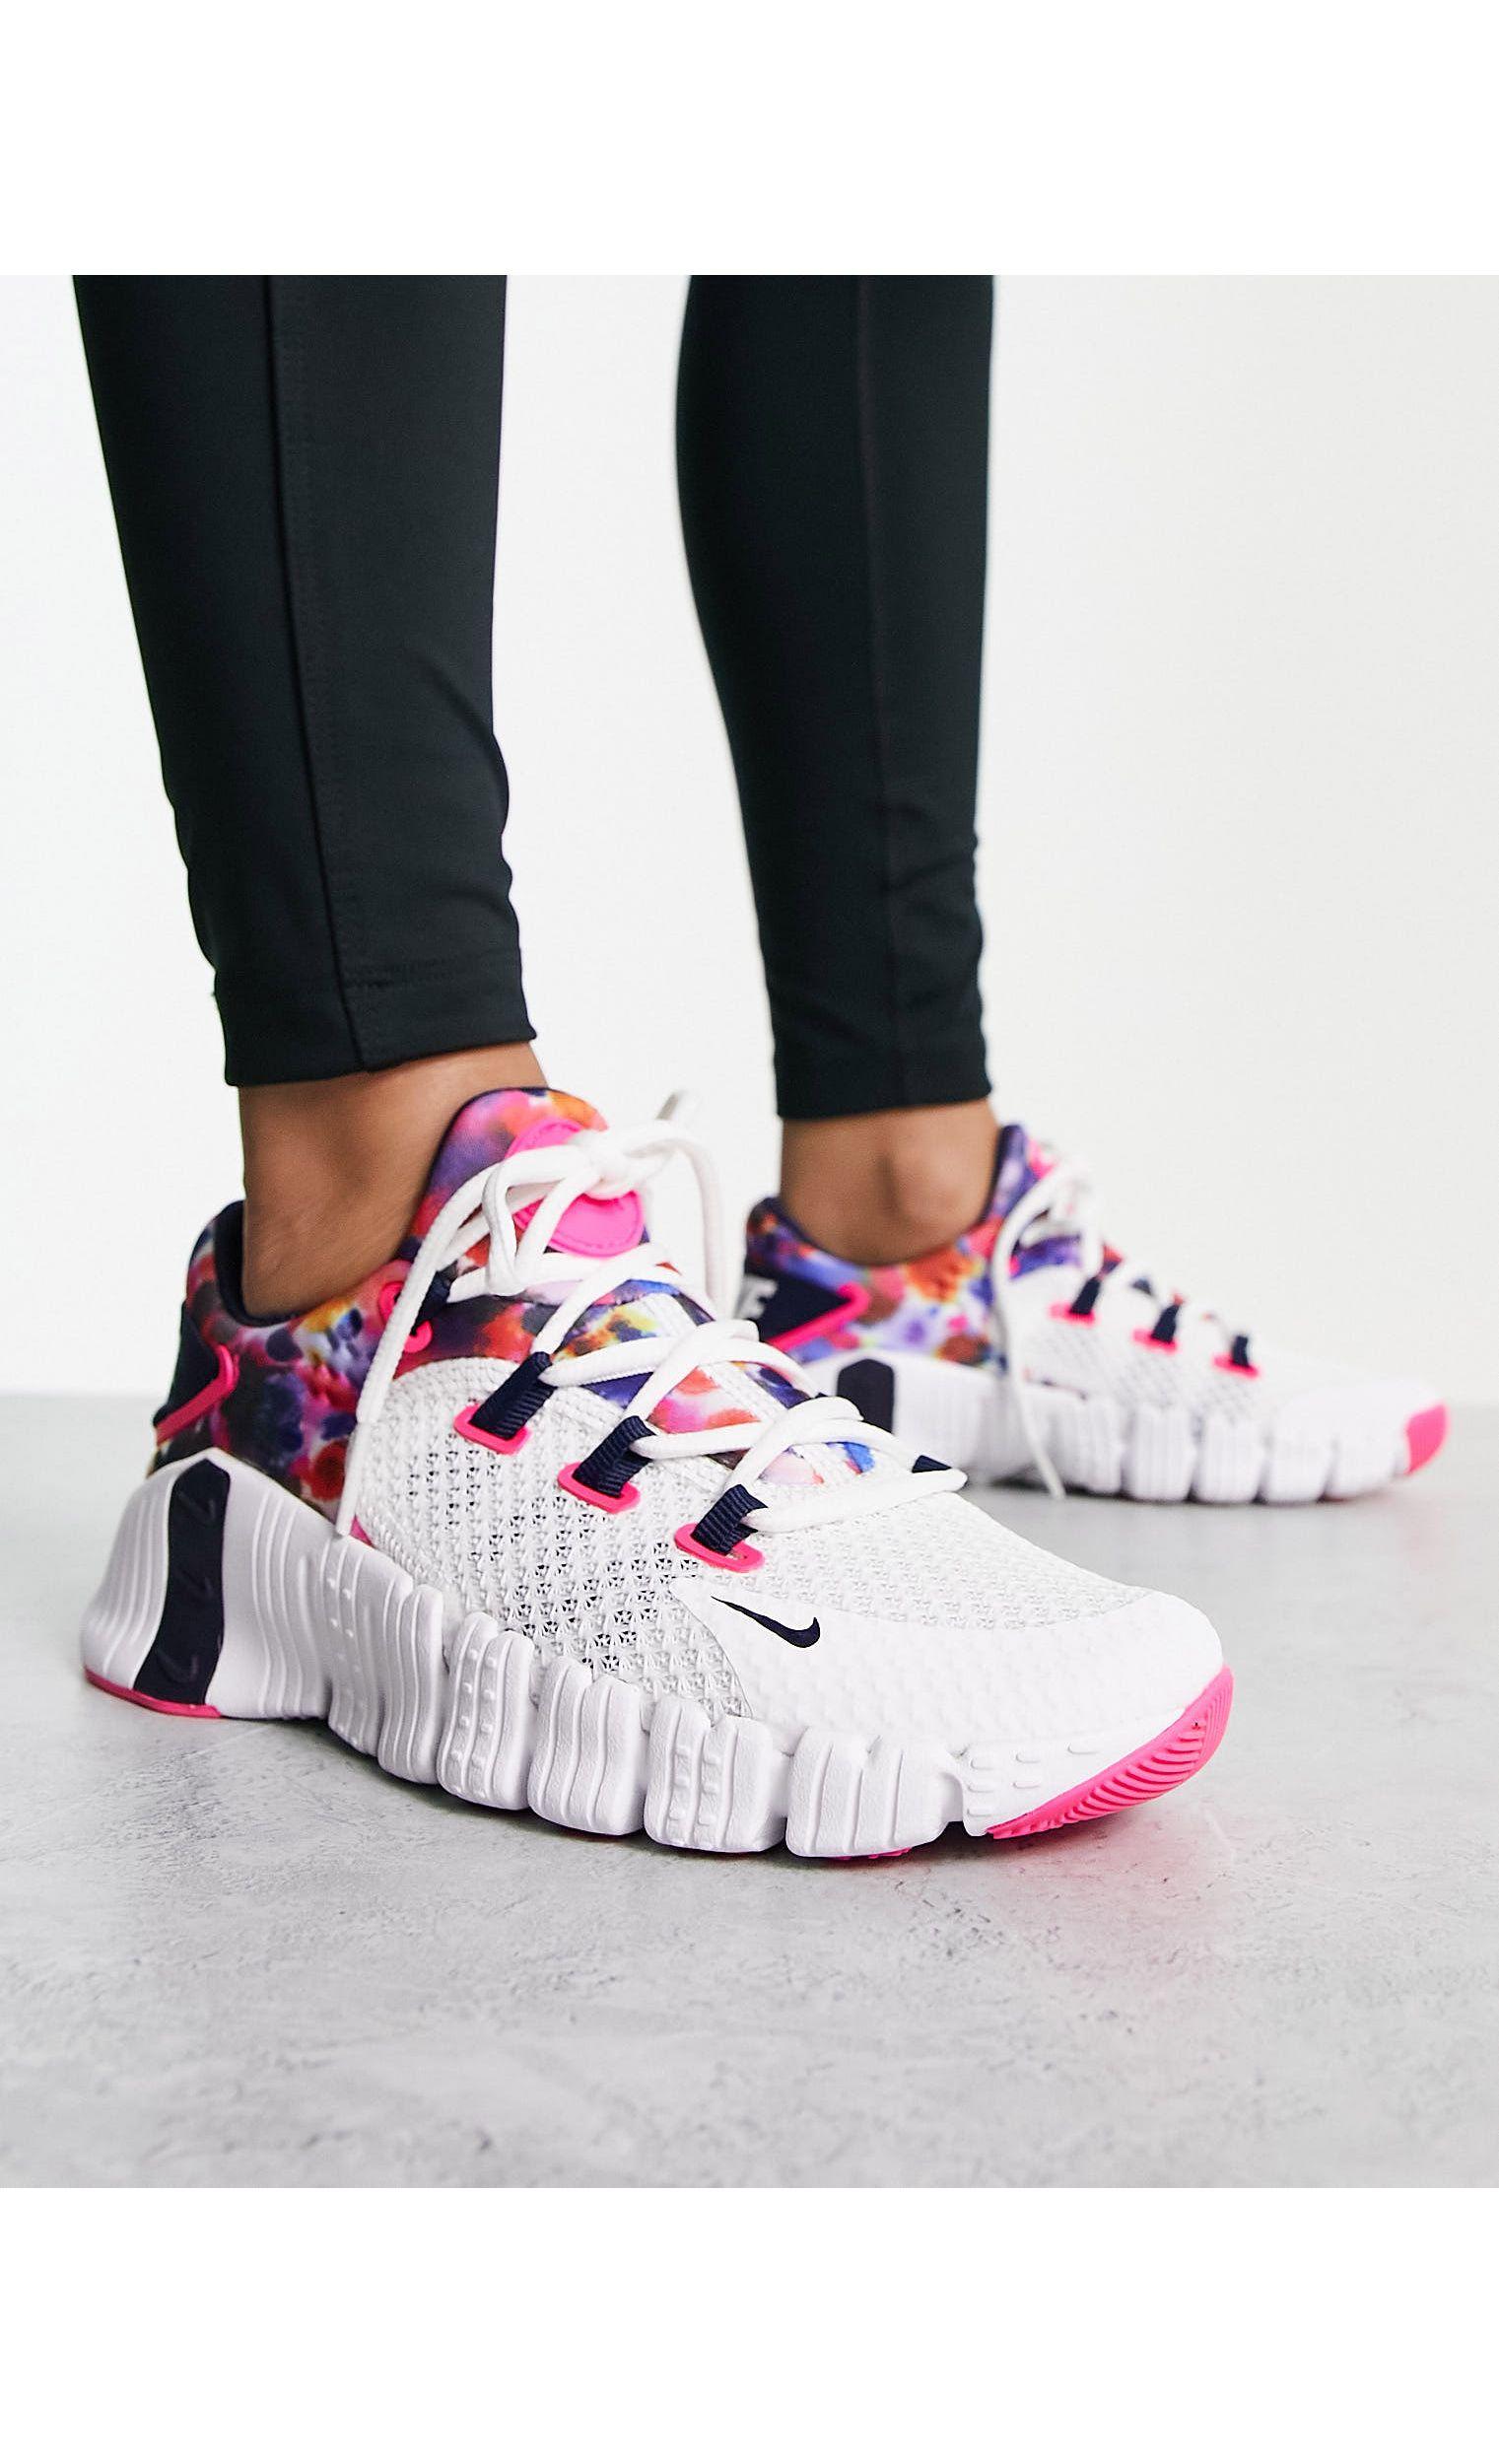 Nike Free Metcon 4 Sneakers in White | Lyst